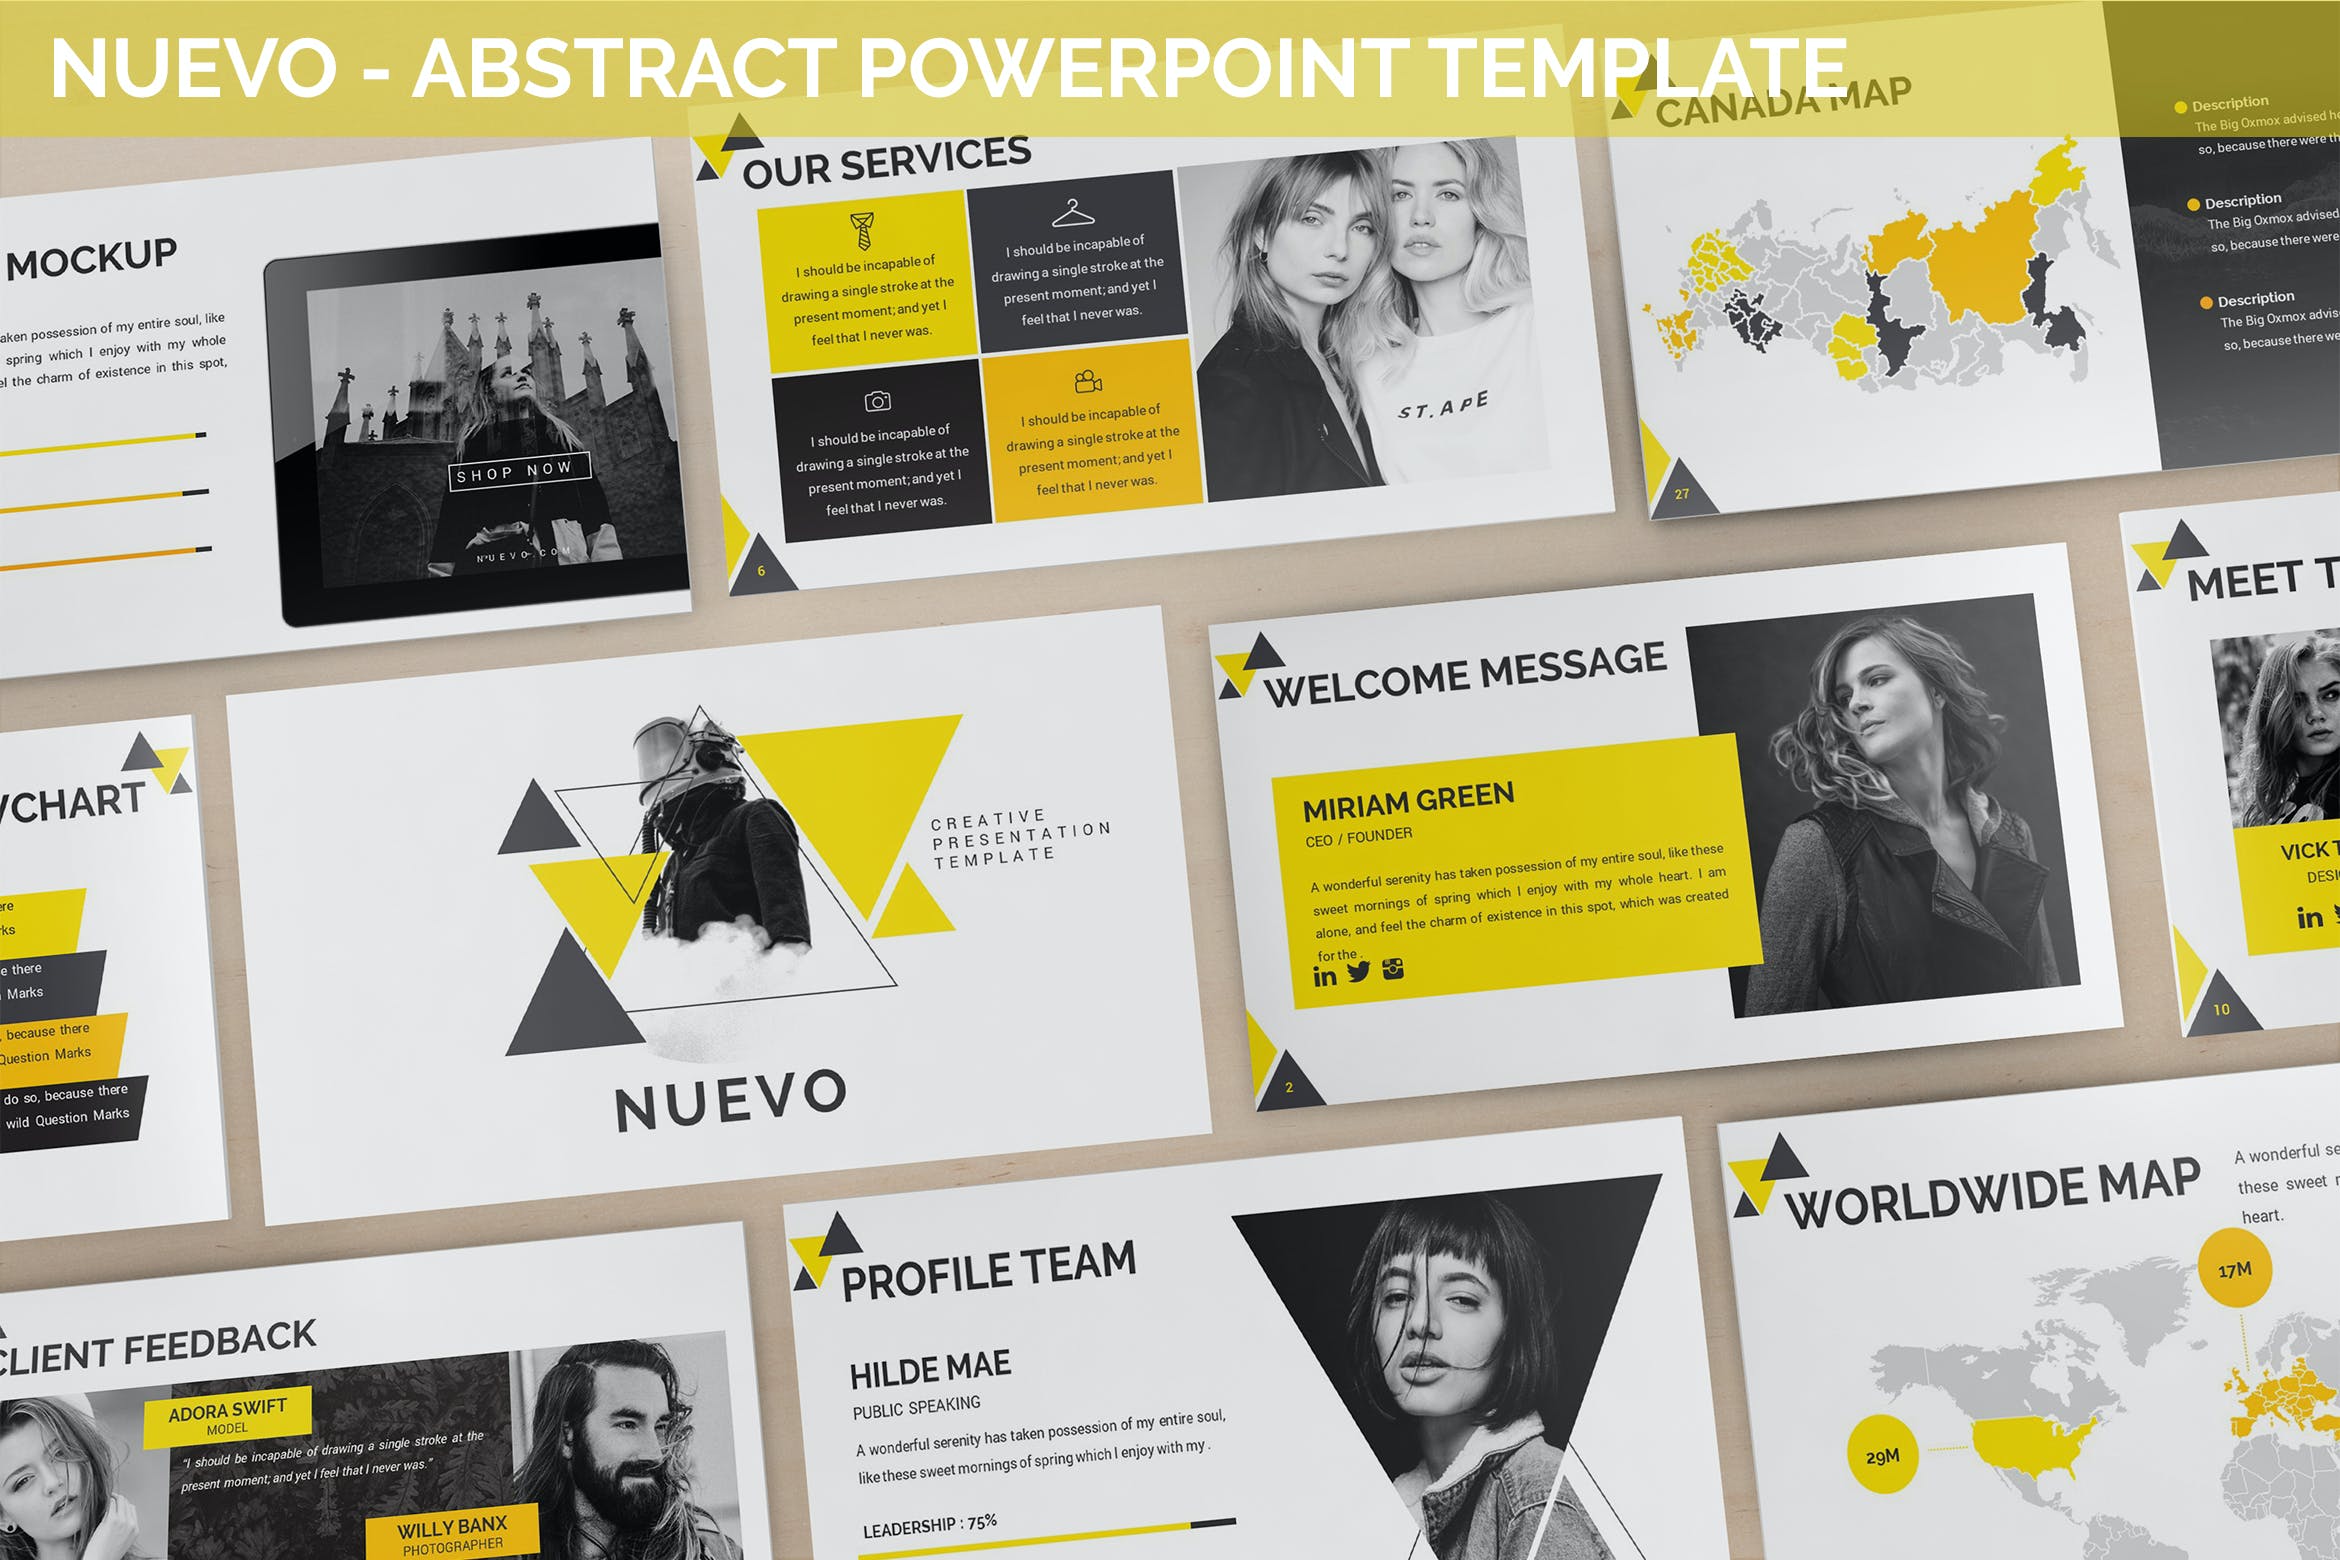 Cover image of Nuevo - Abstract Powerpoint Template.